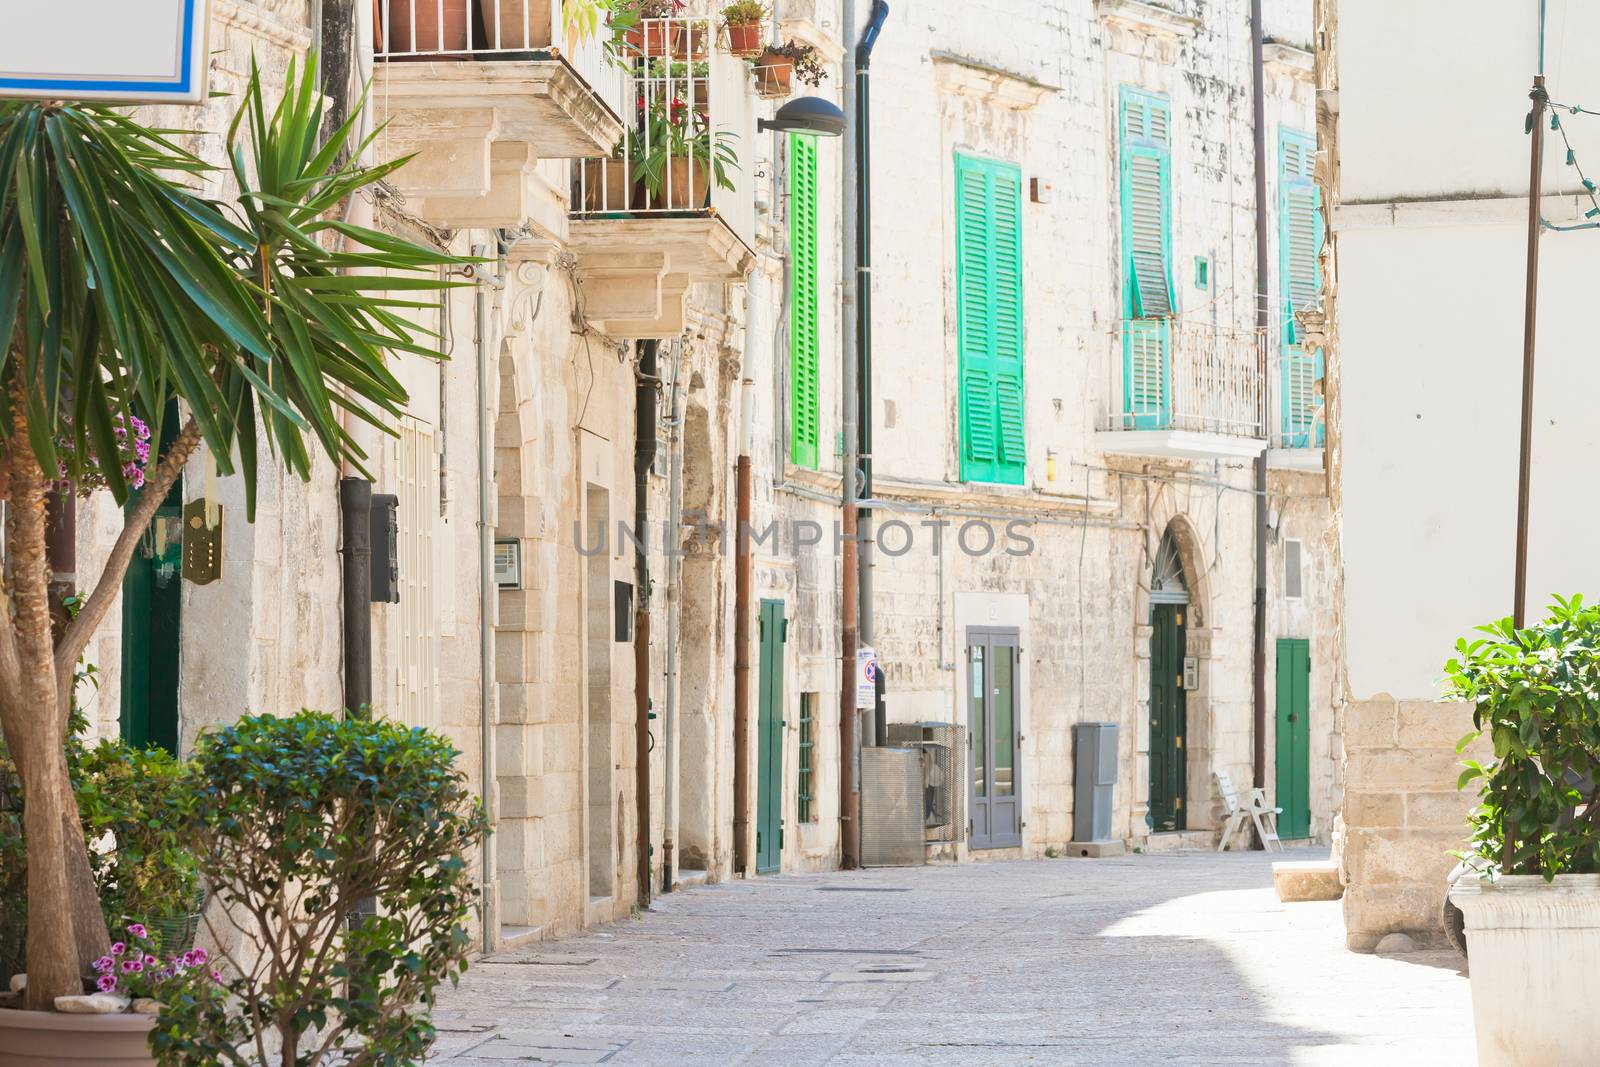 Molfetta, Apulia - Calming atmosphere in the old town of Molfett by tagstiles.com